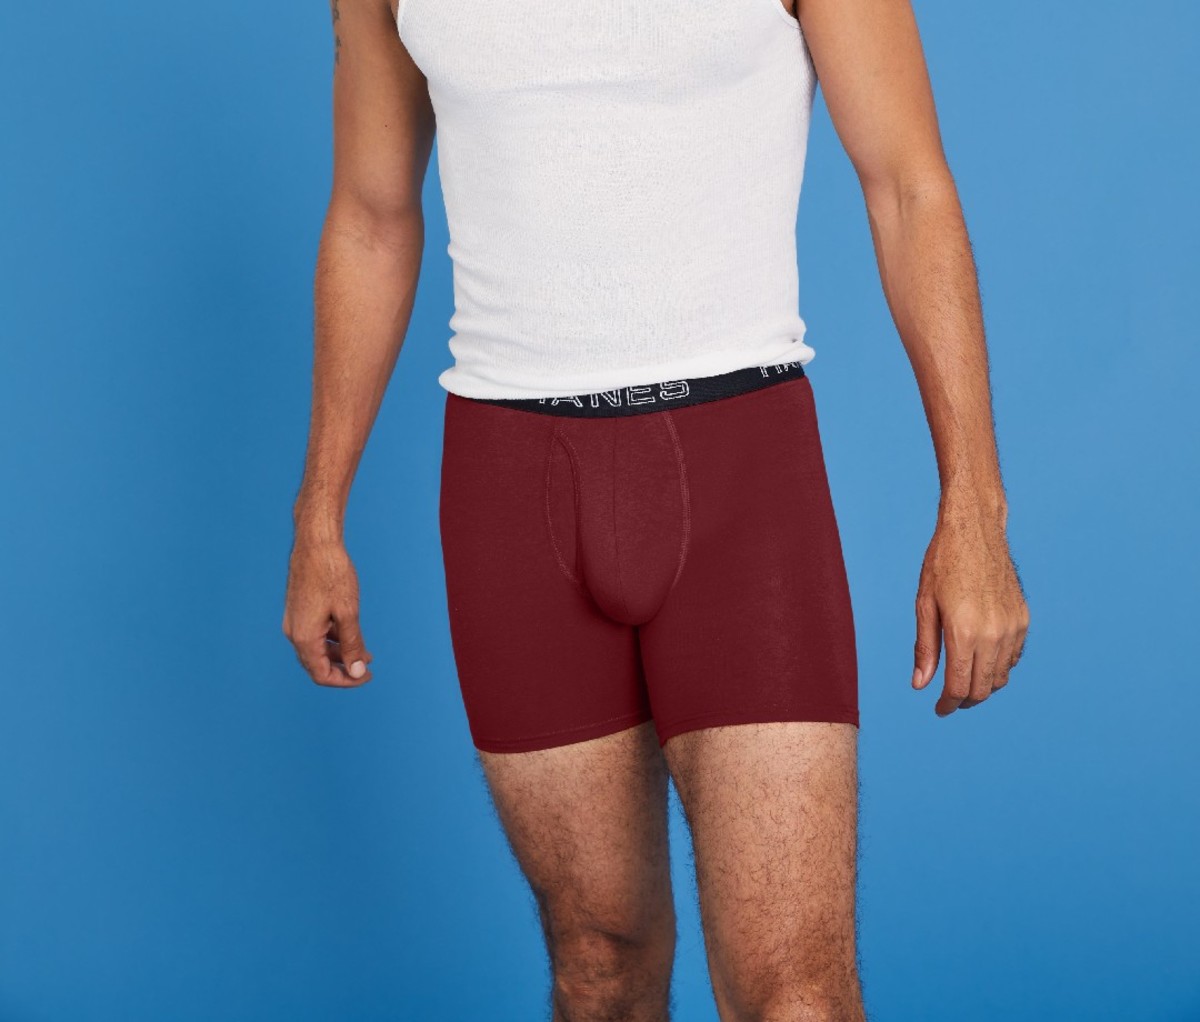 Launched in March of this year, these Hanes Comfort Flex Fit Total Support Pouch Boxer Briefs from the industry leader features a proprietary, patent-pending pouch construction to keep your cajones supported and comfortable, thanks to breathable mesh inserts (which also prevent chafing).